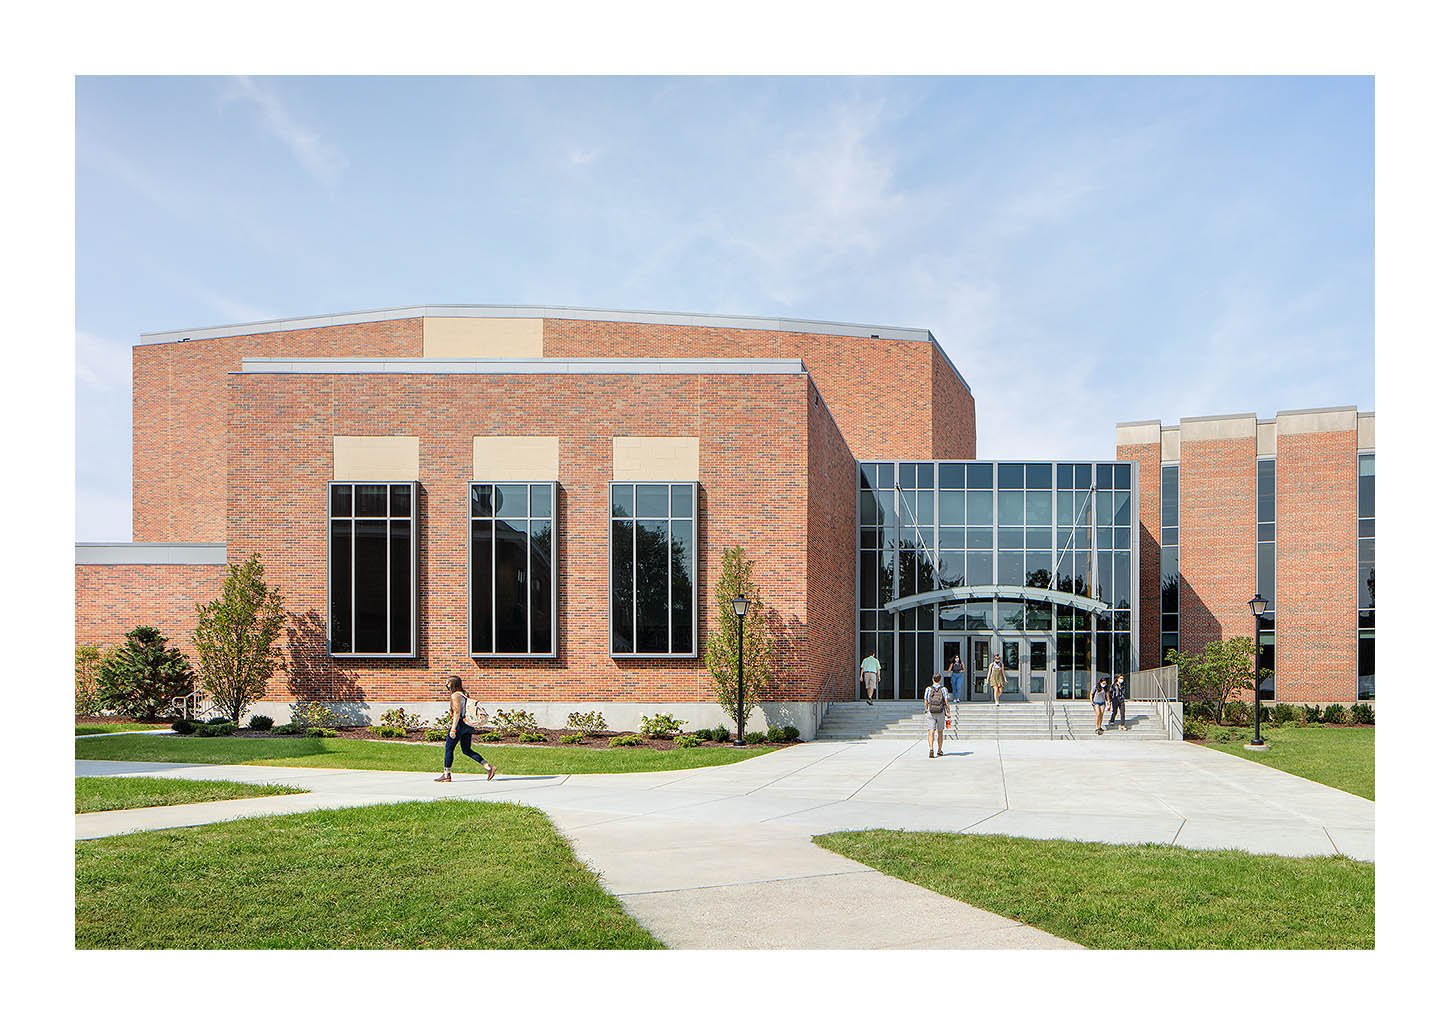  Armerding Center for Music and Arts; Wheaton College; HGA Architects and Engineers, FGM Architects 